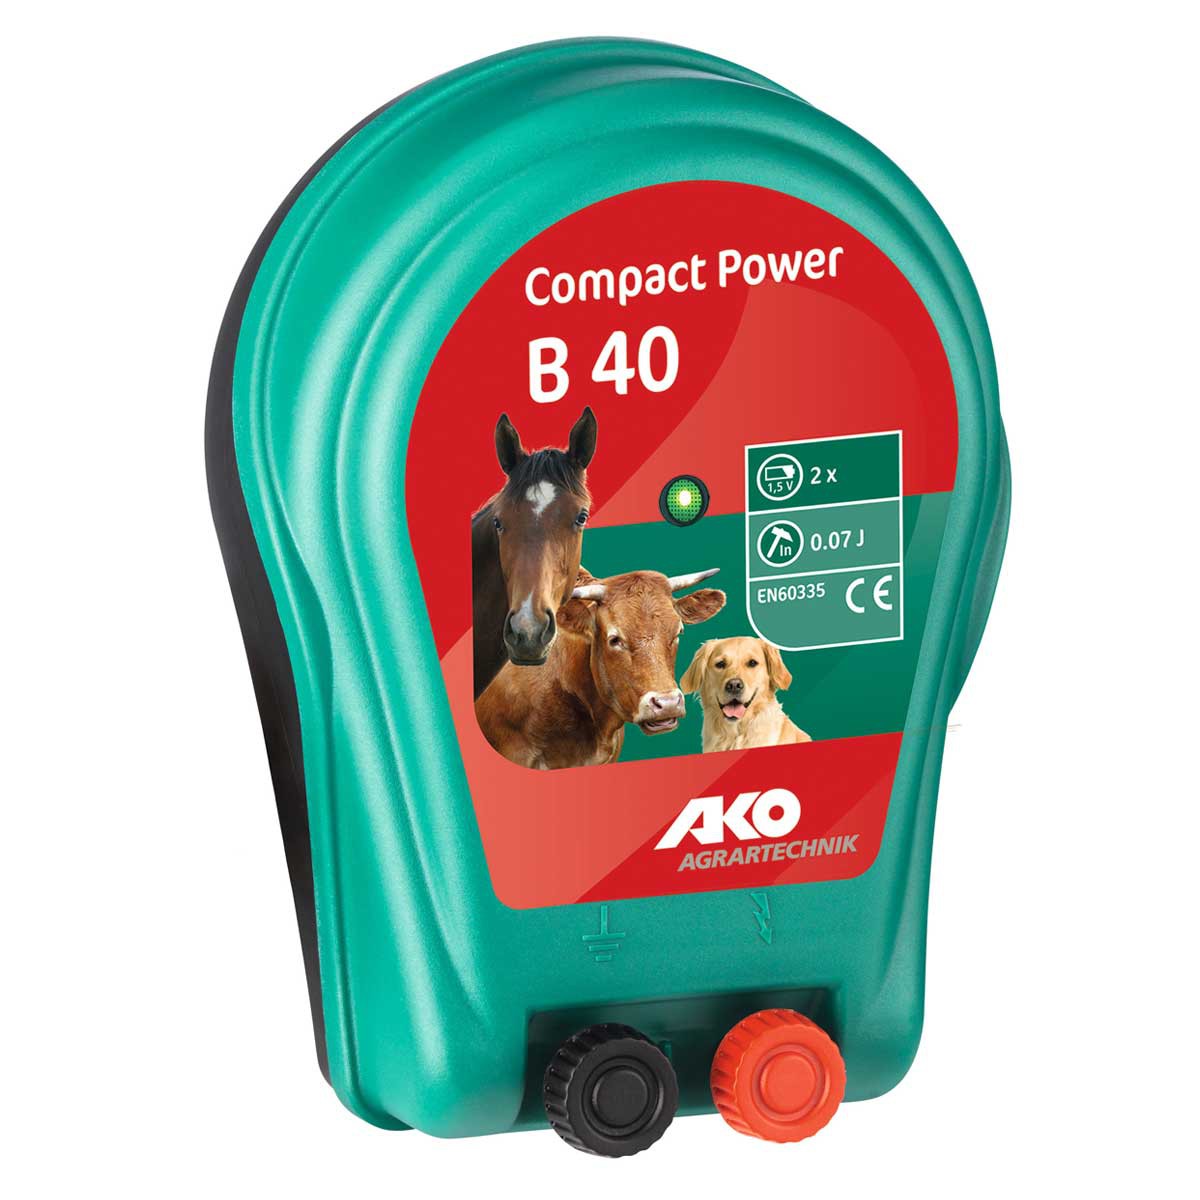 AKO Compact Power B 40 Battery Energizer 3V 0,07 joules